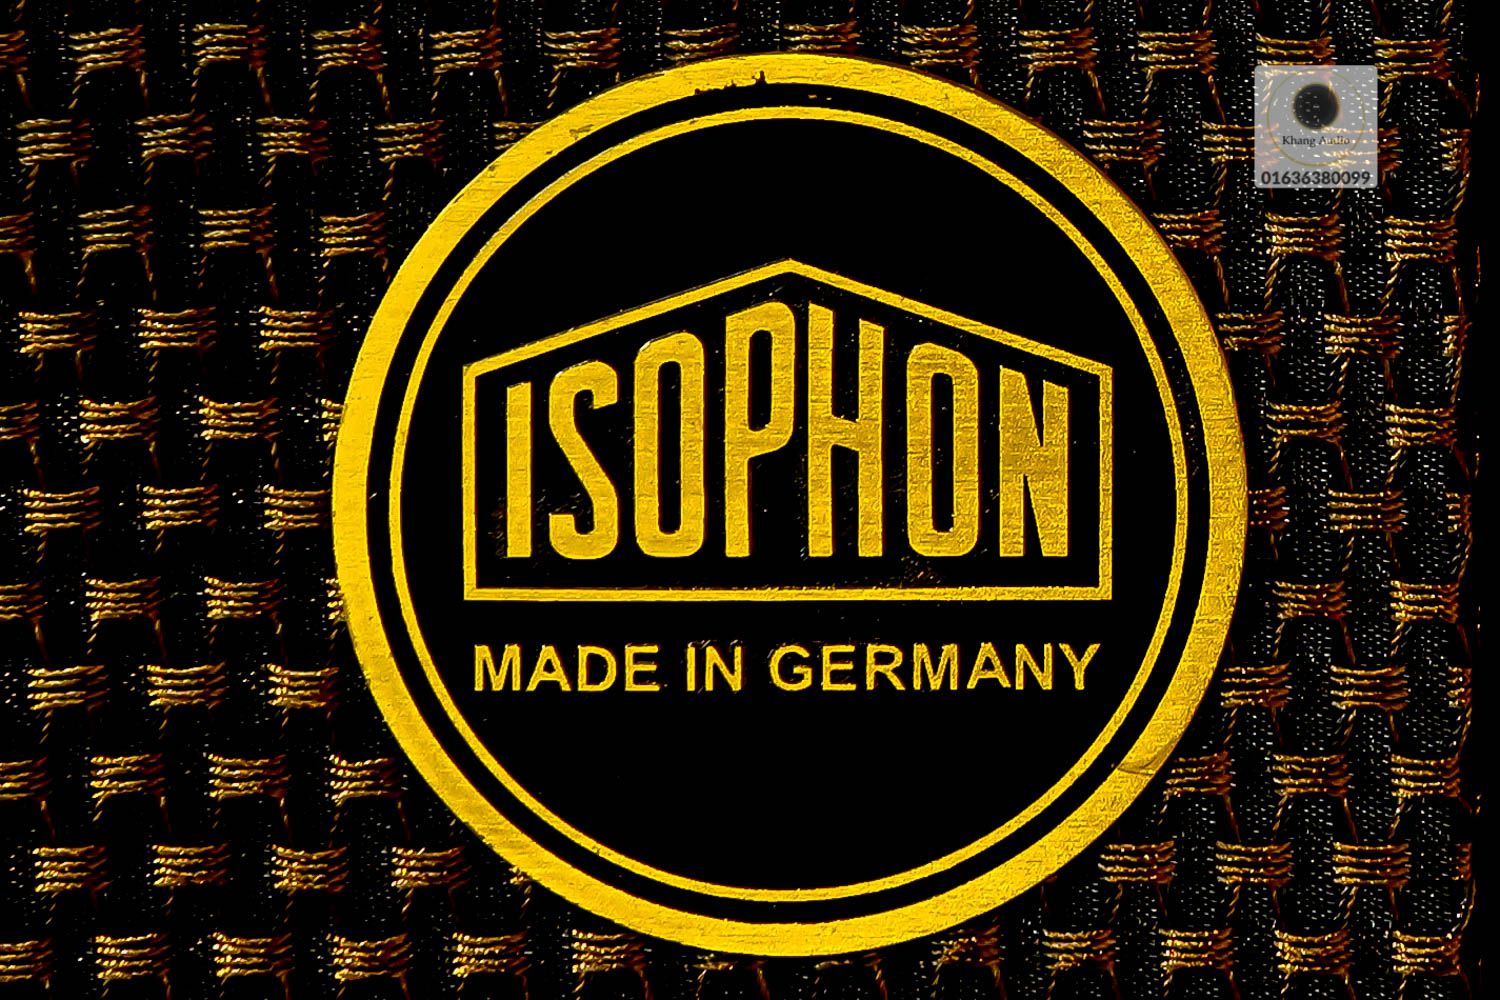 ISOPHON – The sound of a great name